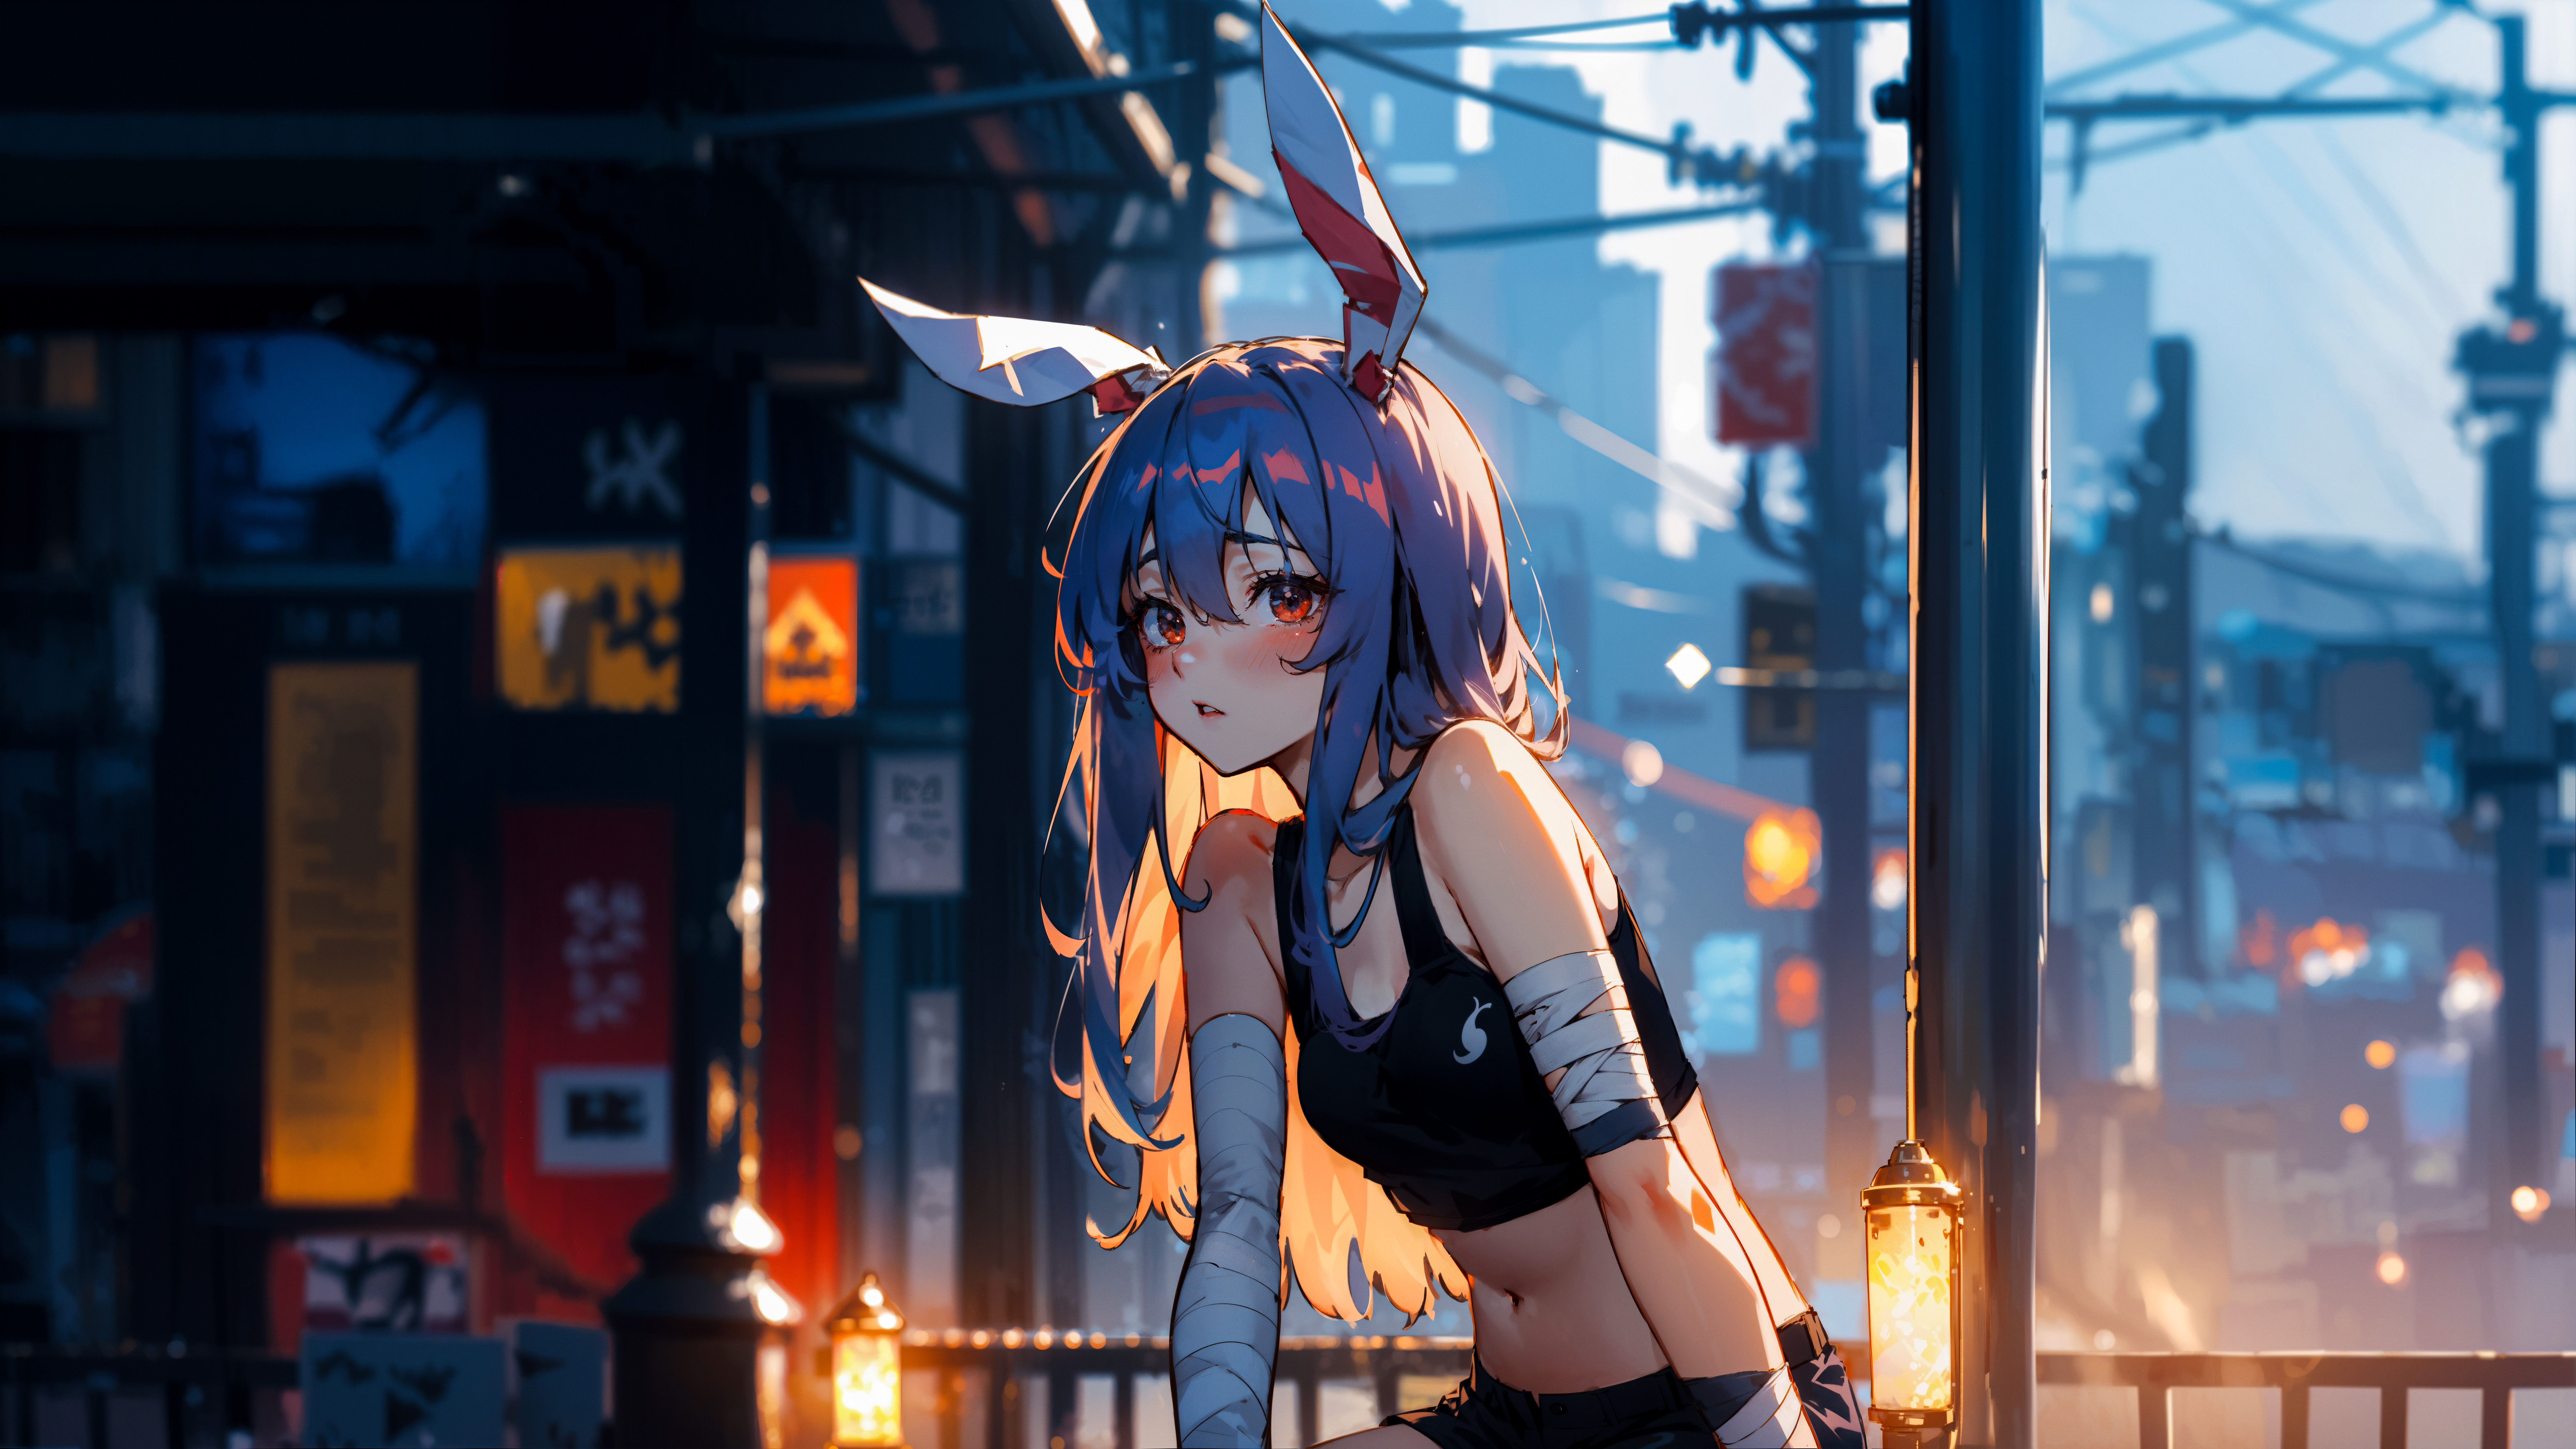 Anime 8192x4608 anime girls bunny ears Touhou purple hair belly button sitting outdoors evening solo bandaged arm blurry background Iodoff AI art digital art blurred blushing women outdoors long hair city lights city bunny girl bandages